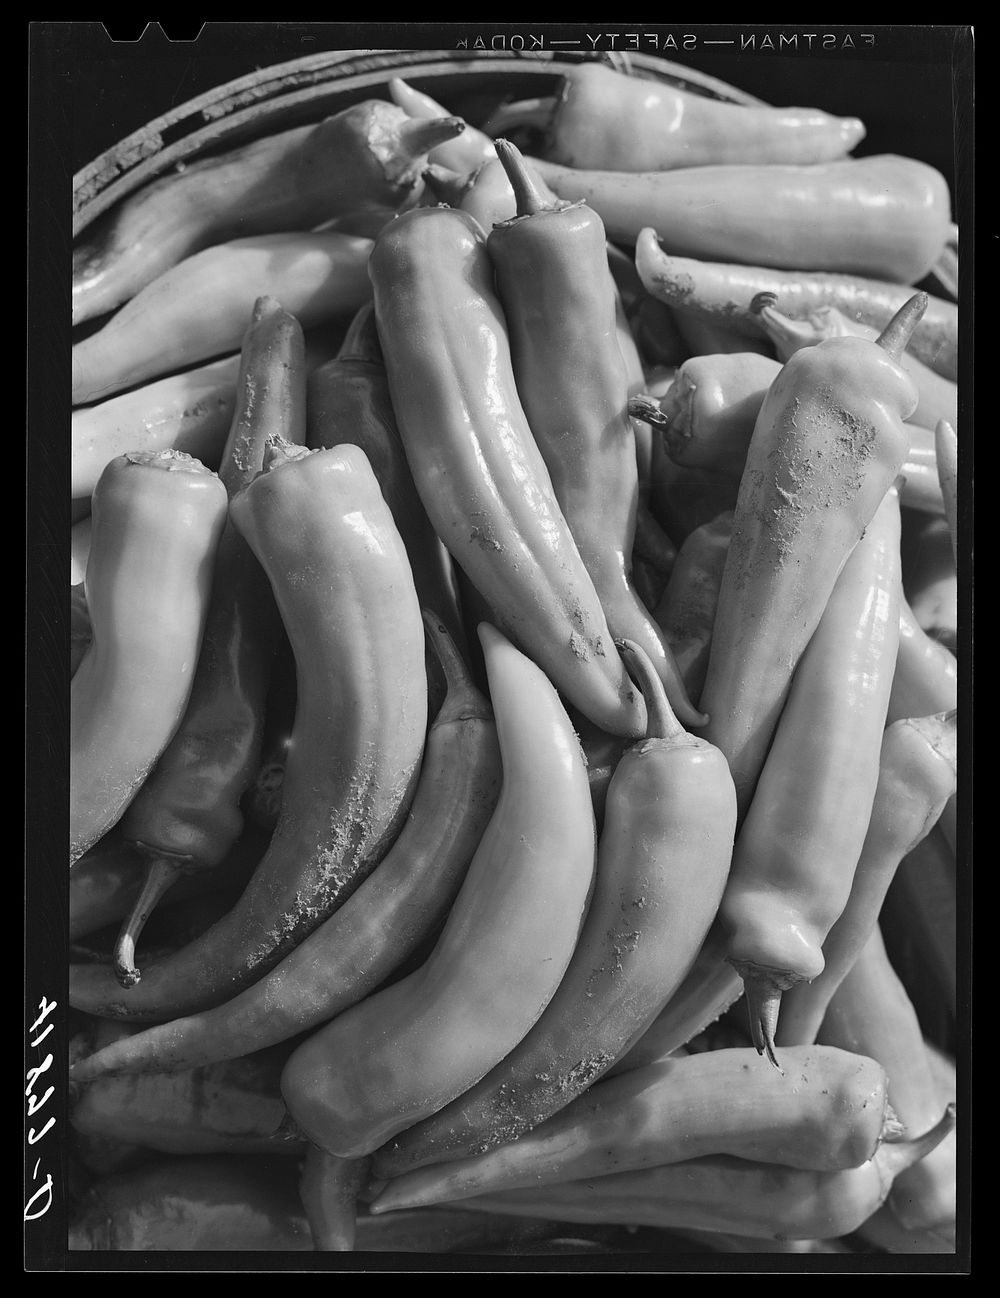 "Hungarian yellow wax peppers" grown on the farm of Patrick Marino. Devon, Connecticut. Sourced from the Library of Congress.